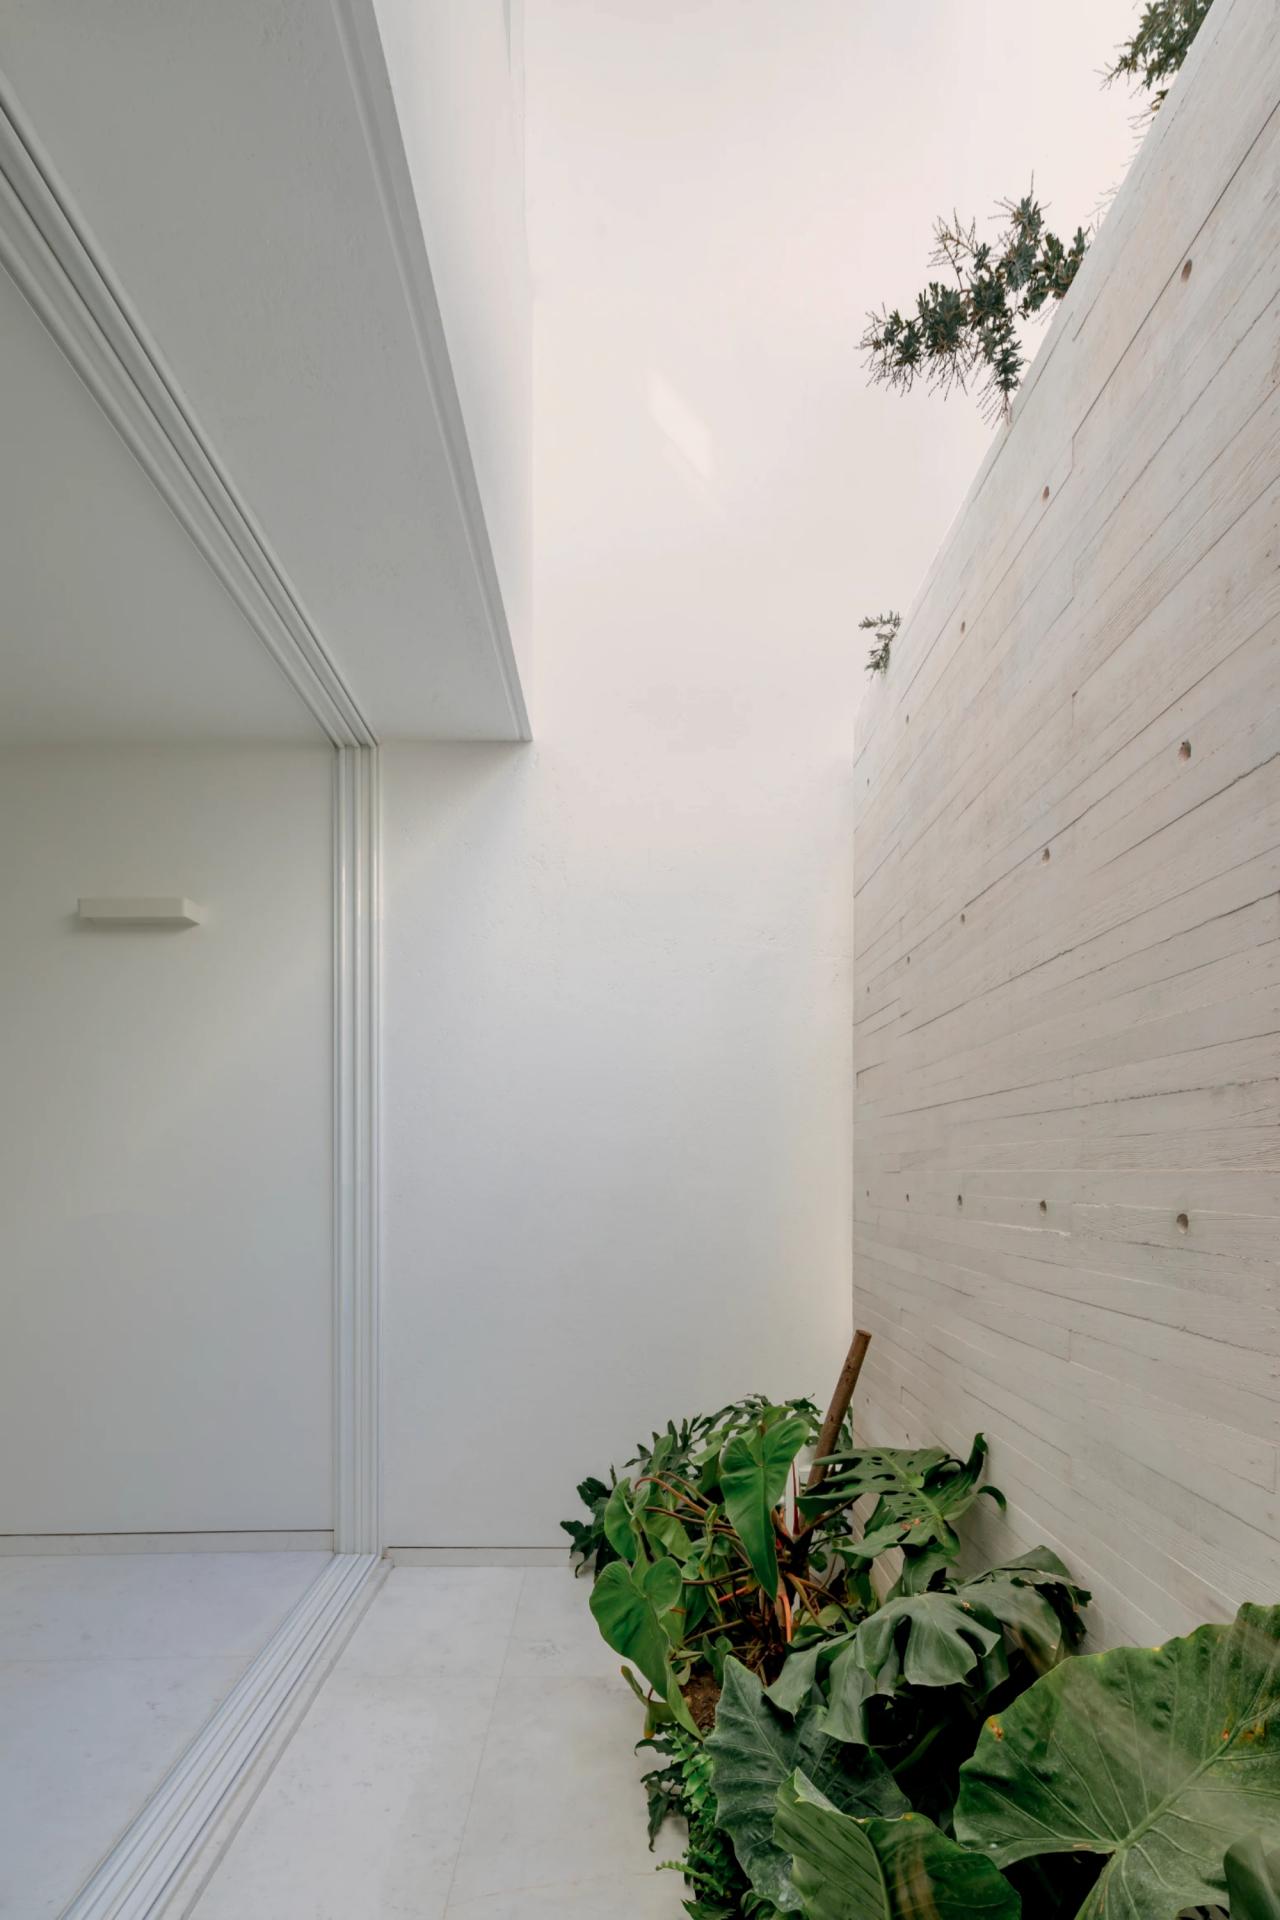 This 3,347 sq. ft. all-white home in Mexico is a minimalist sanctuary